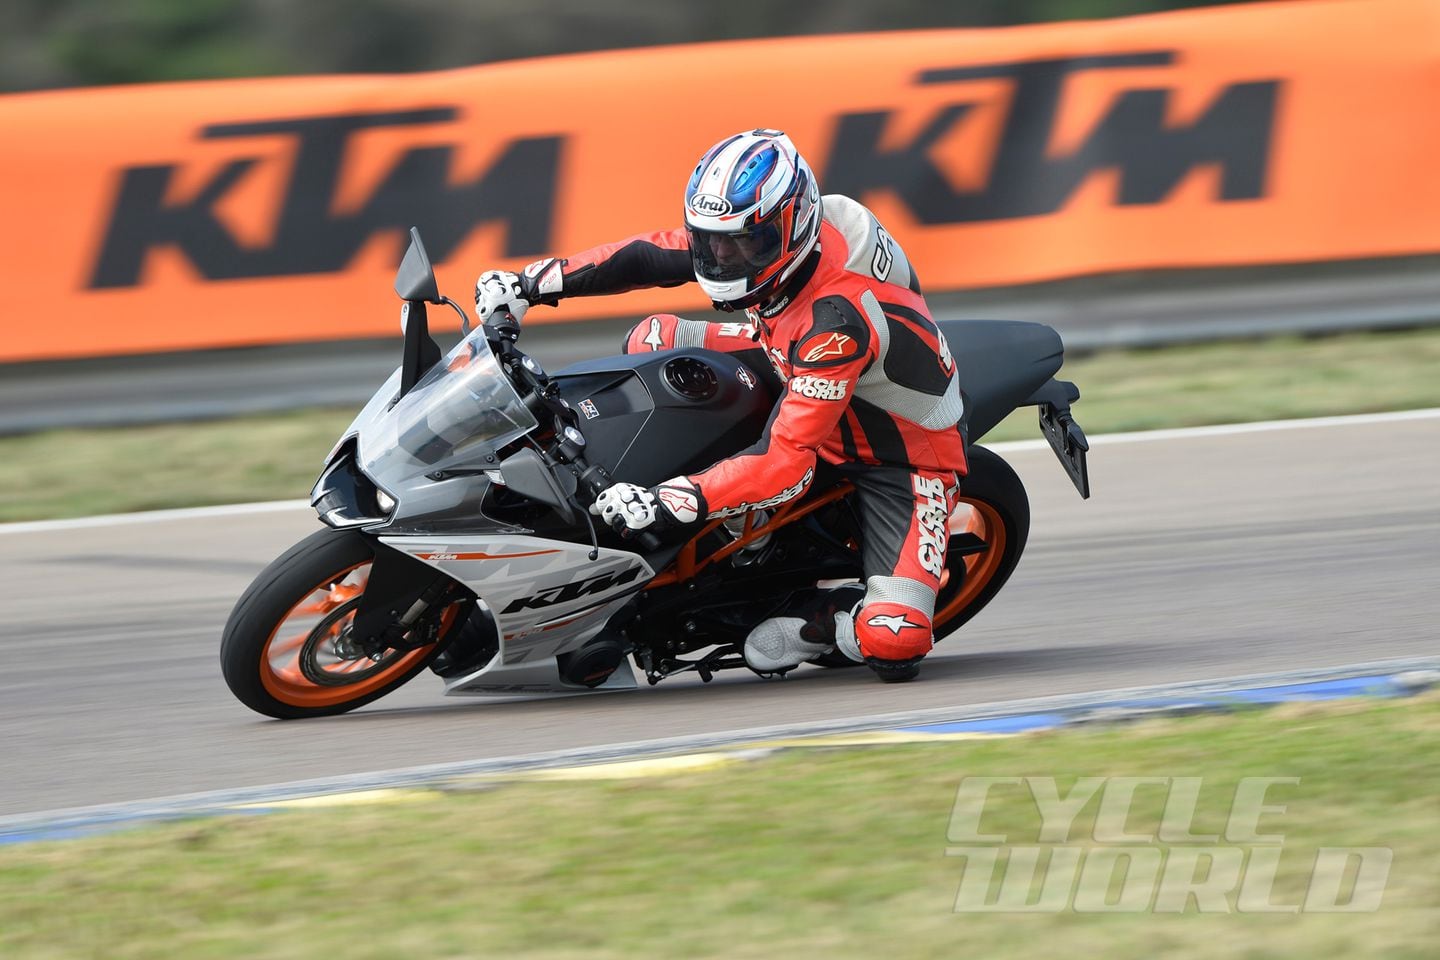 Best entry sport bike? 2015 KTM RC 390 ride review